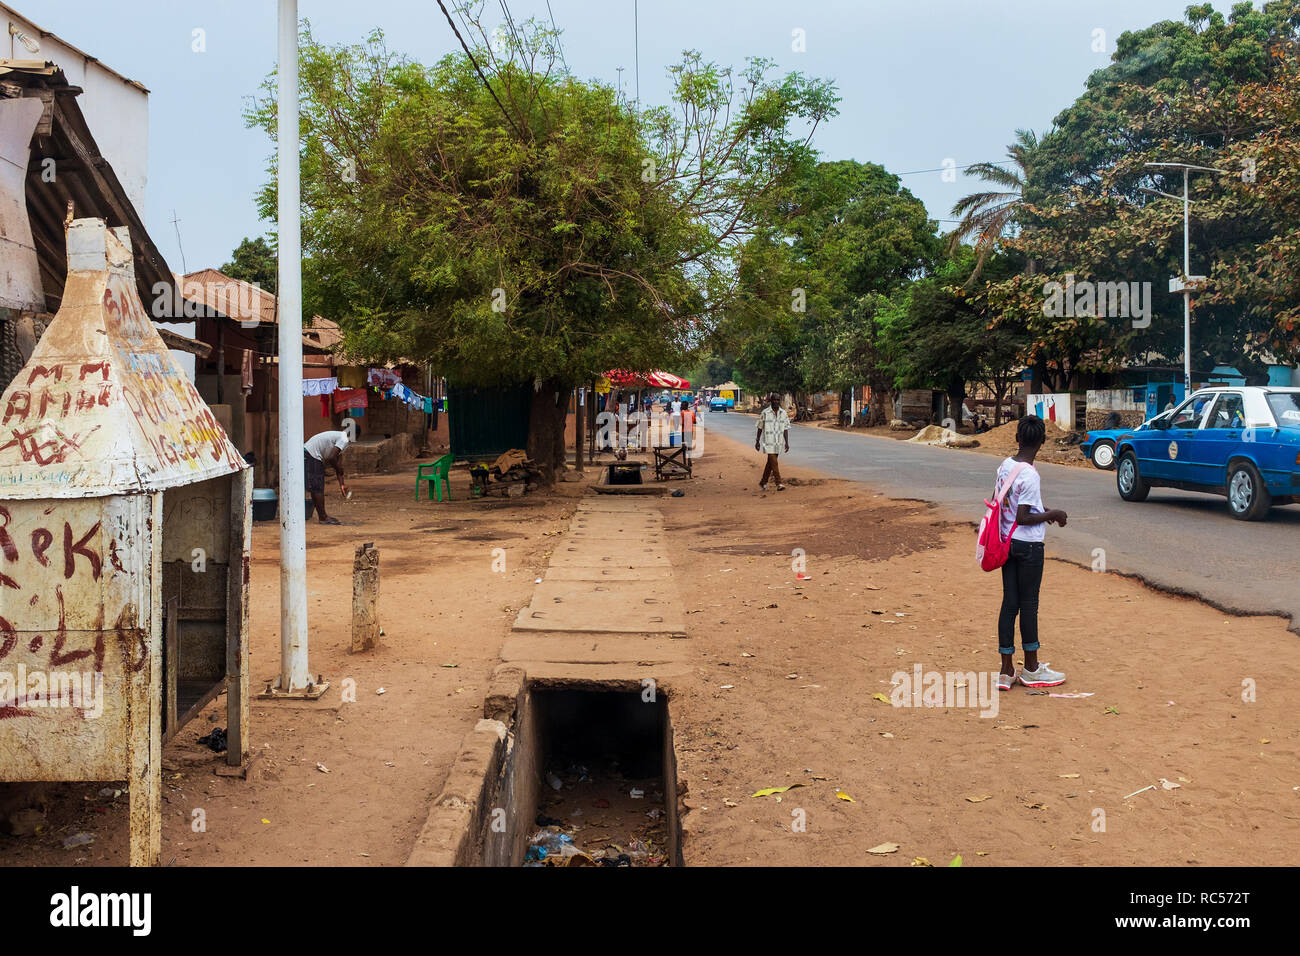 Bissau, Republic of Guinea-Bissau - February 6, 2018: Street scene at the Missira neighbourhood, with people on street, in the city of Bissau, Guinea  Stock Photo